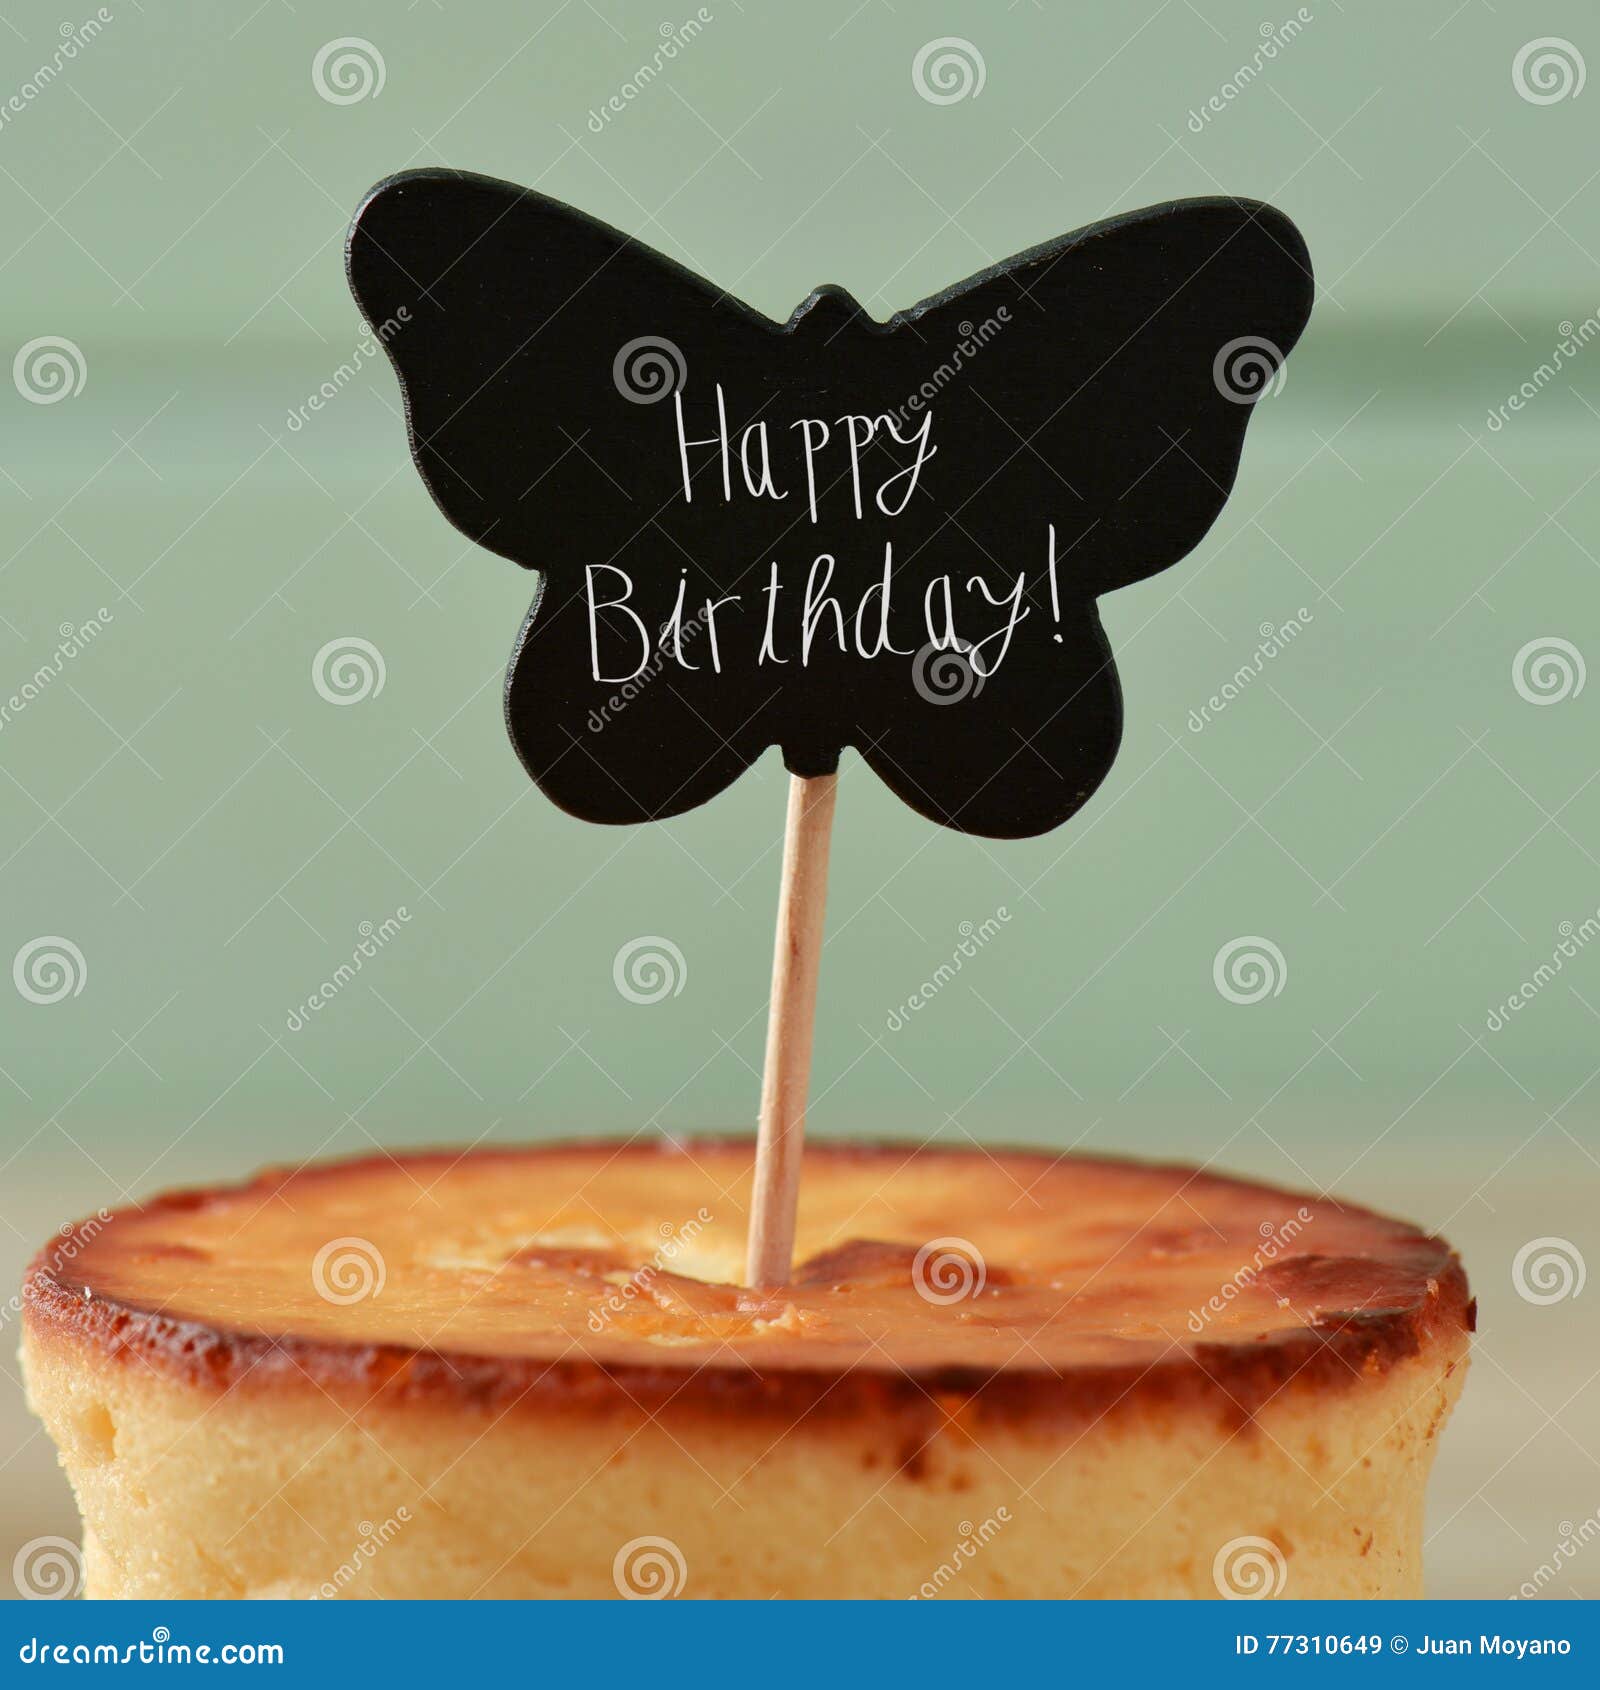 Cake and Text Happy Birthday Stock Image - Image of food, home: 77310649